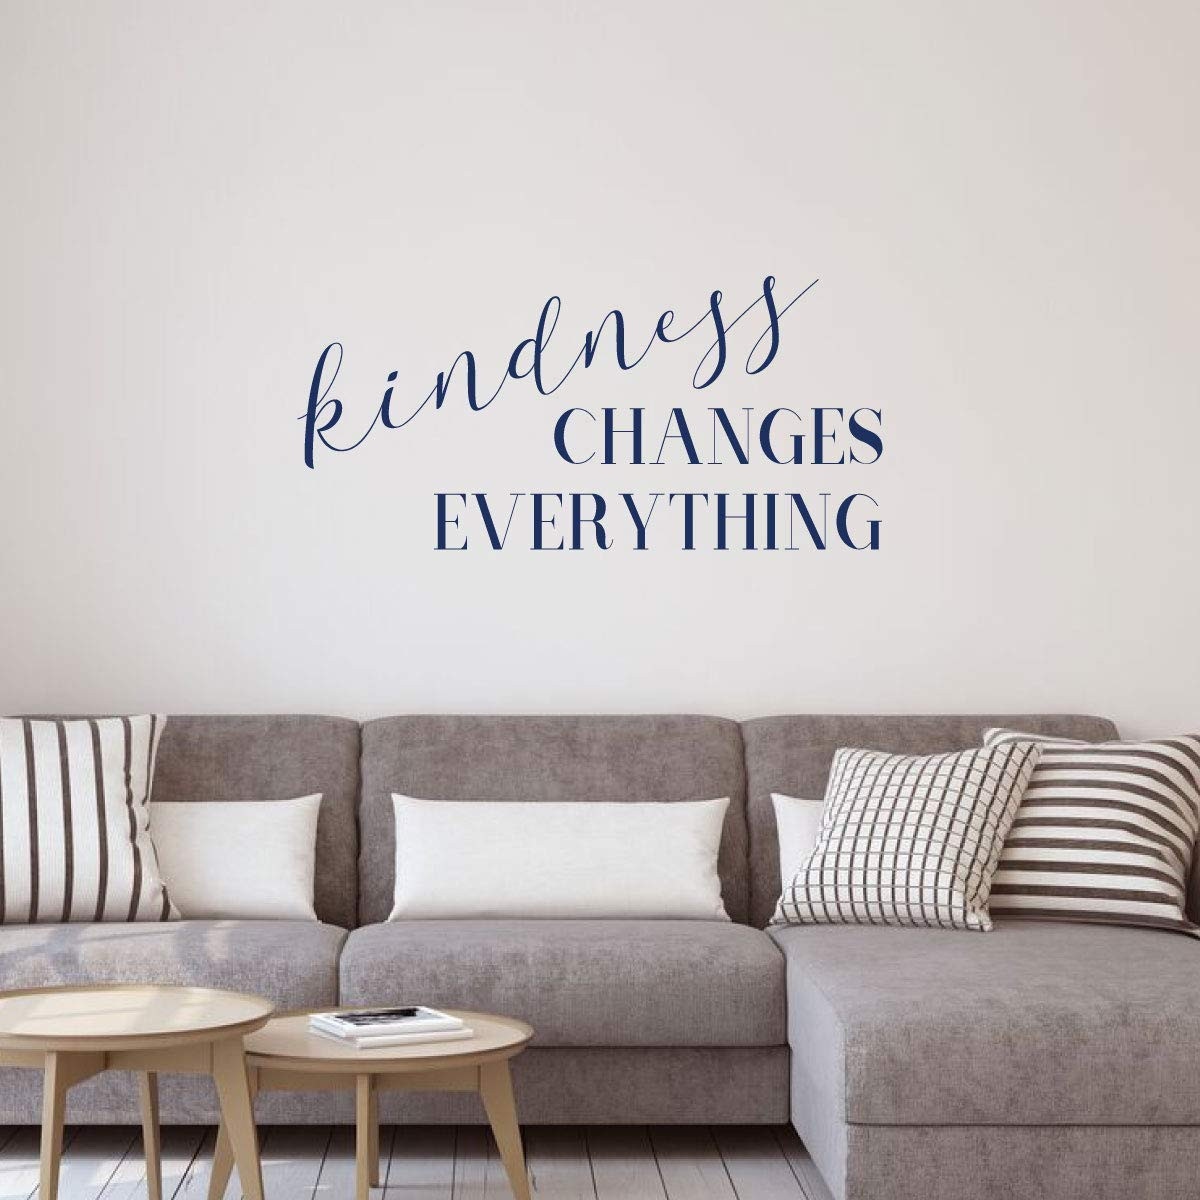 Living Room Wall Decal
 Kindness Changes Everything Living Room Wall Decal Vinyl